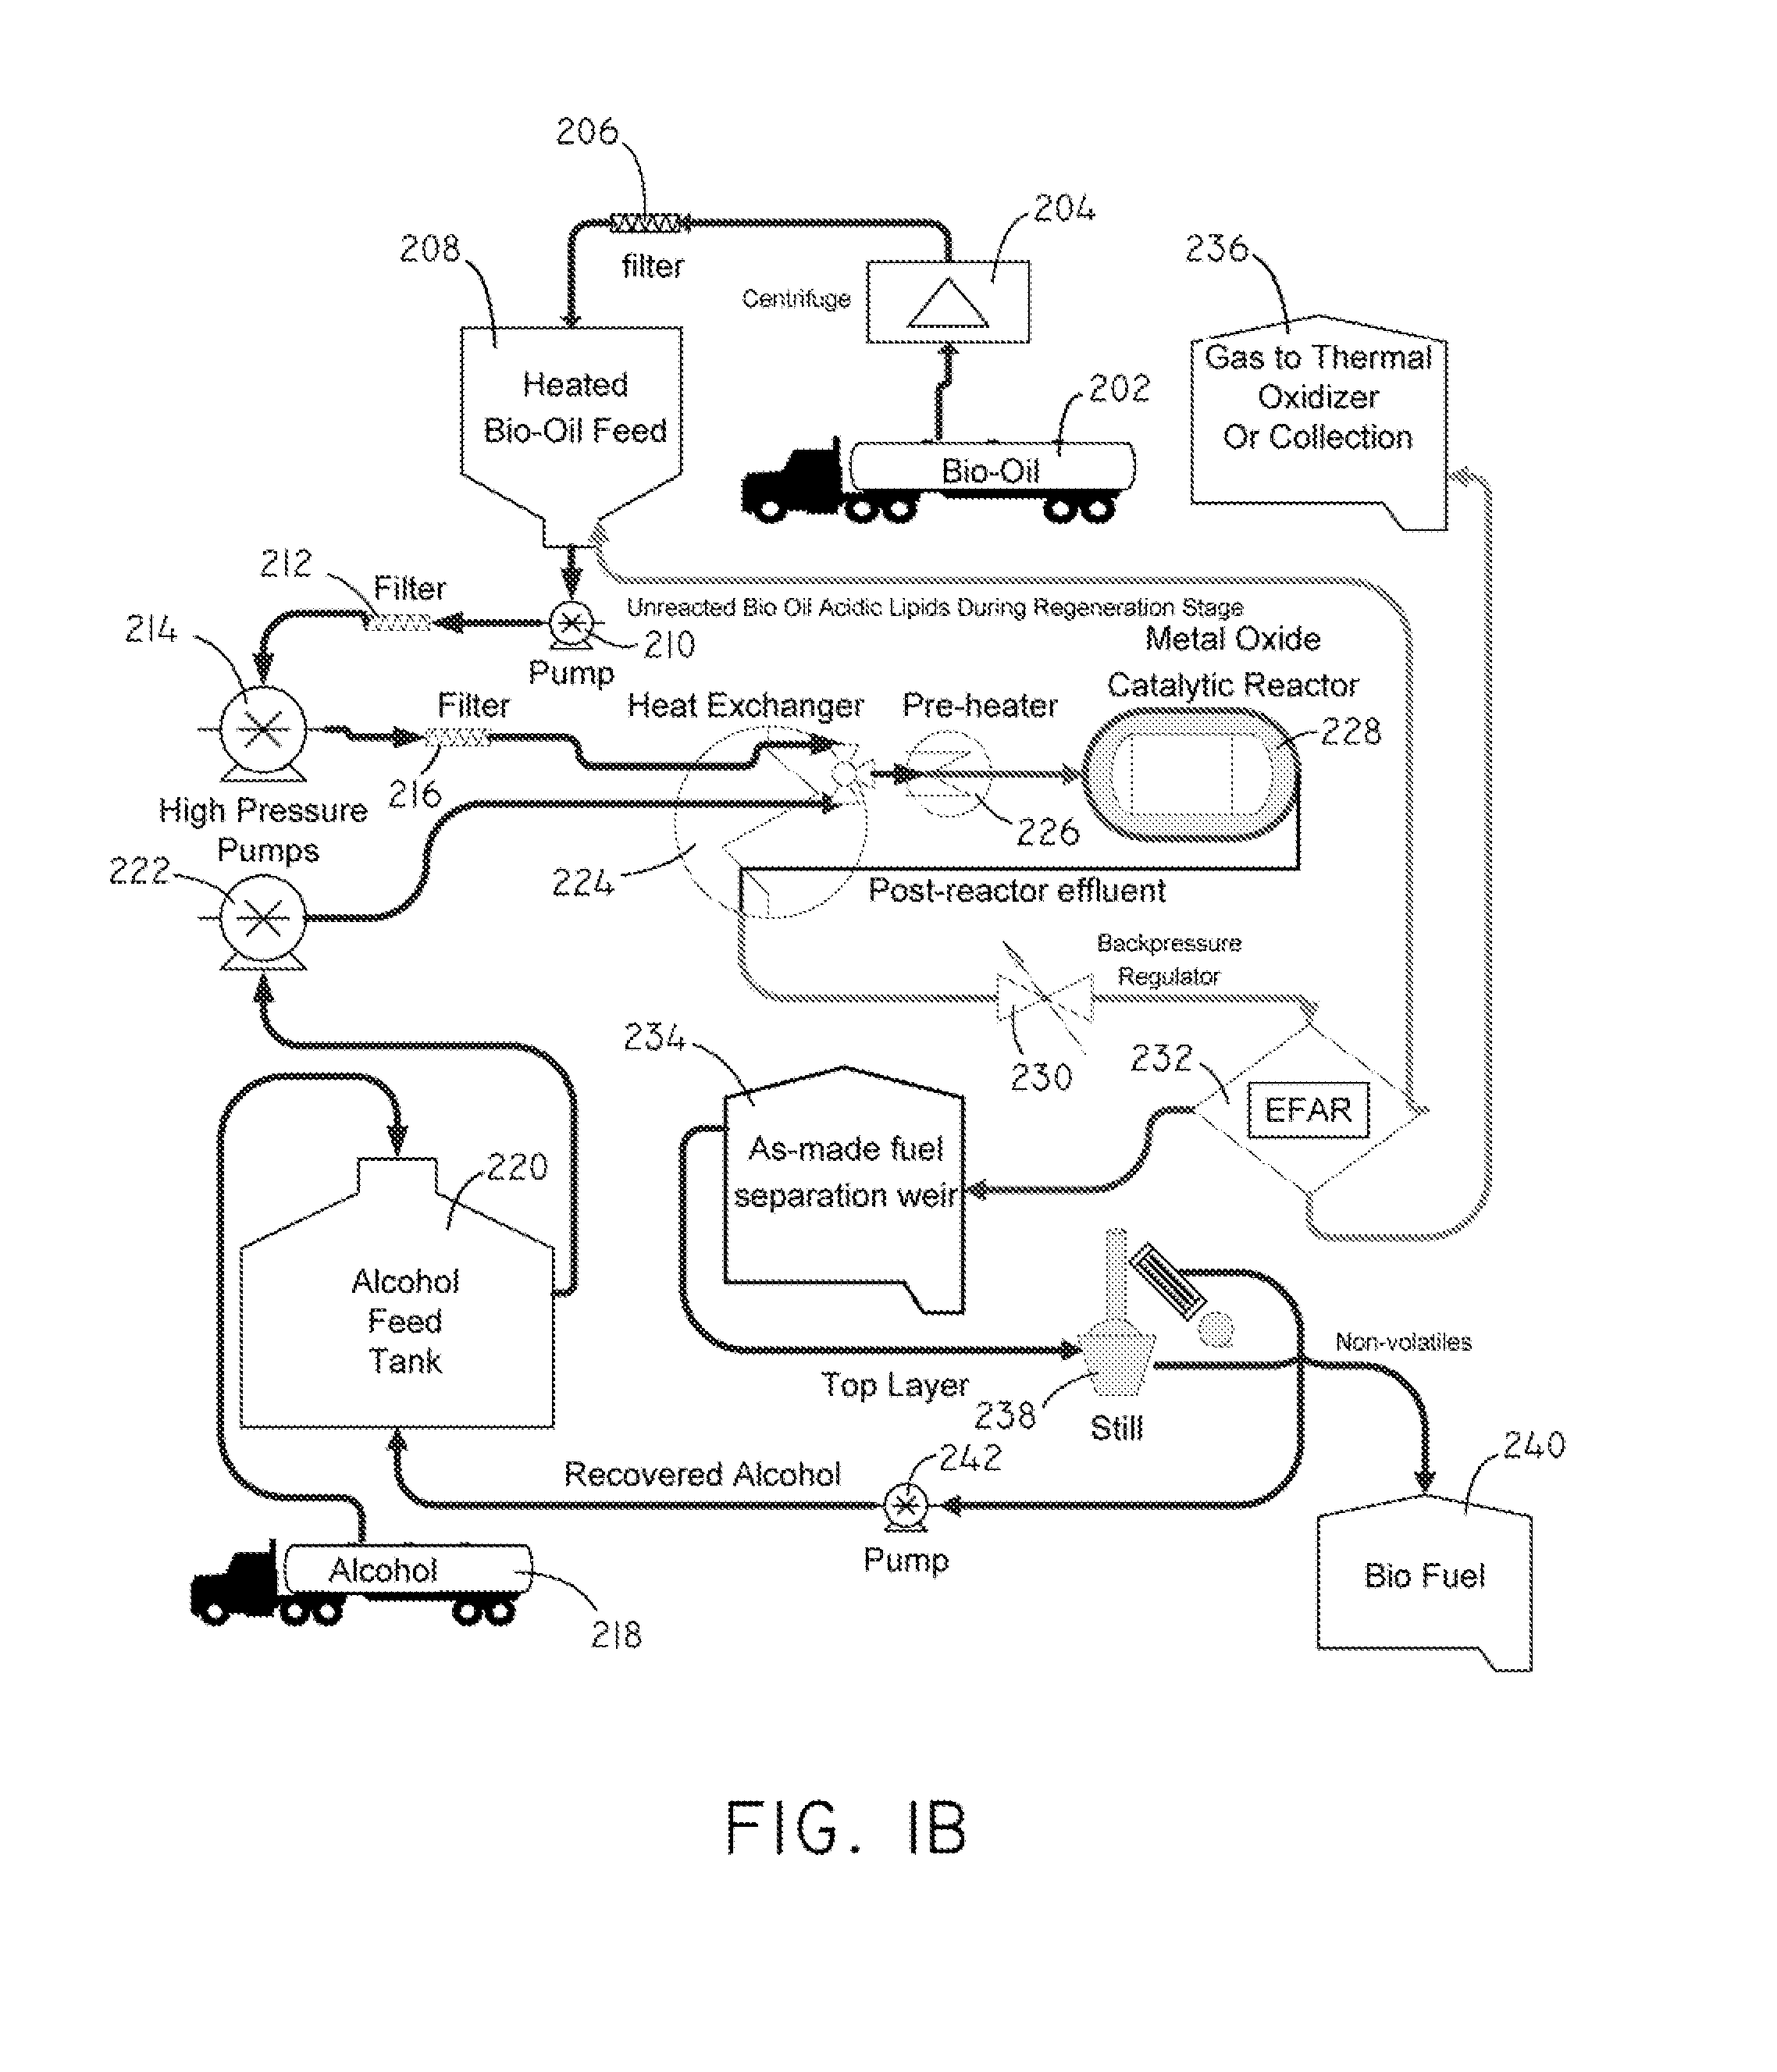 Systems and methods for producing fuels from biomass